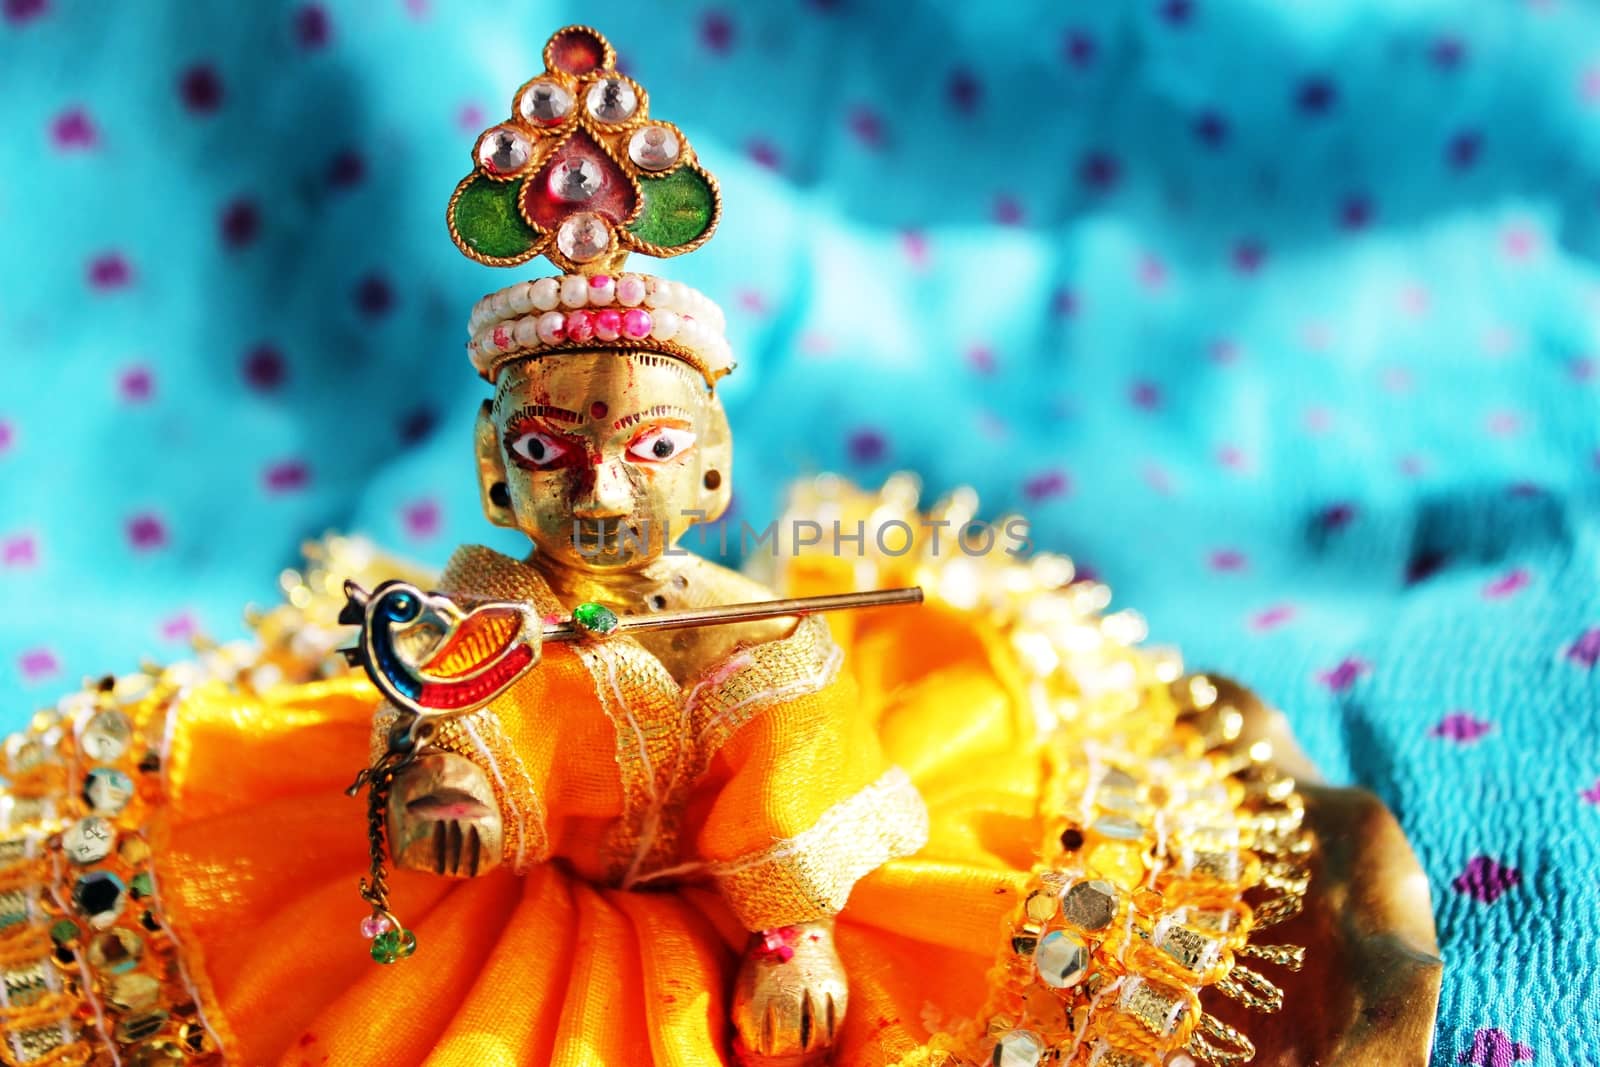 Brass idol of baby lord Krishna, a Hindu god, dressed in bright yellow clothing, against a polka dotted aqua colored cloth background, sporting his legendary musical flute. Ideal for Hindu religious use and festivals - like Janamashtami, Gokul ashtami. 
